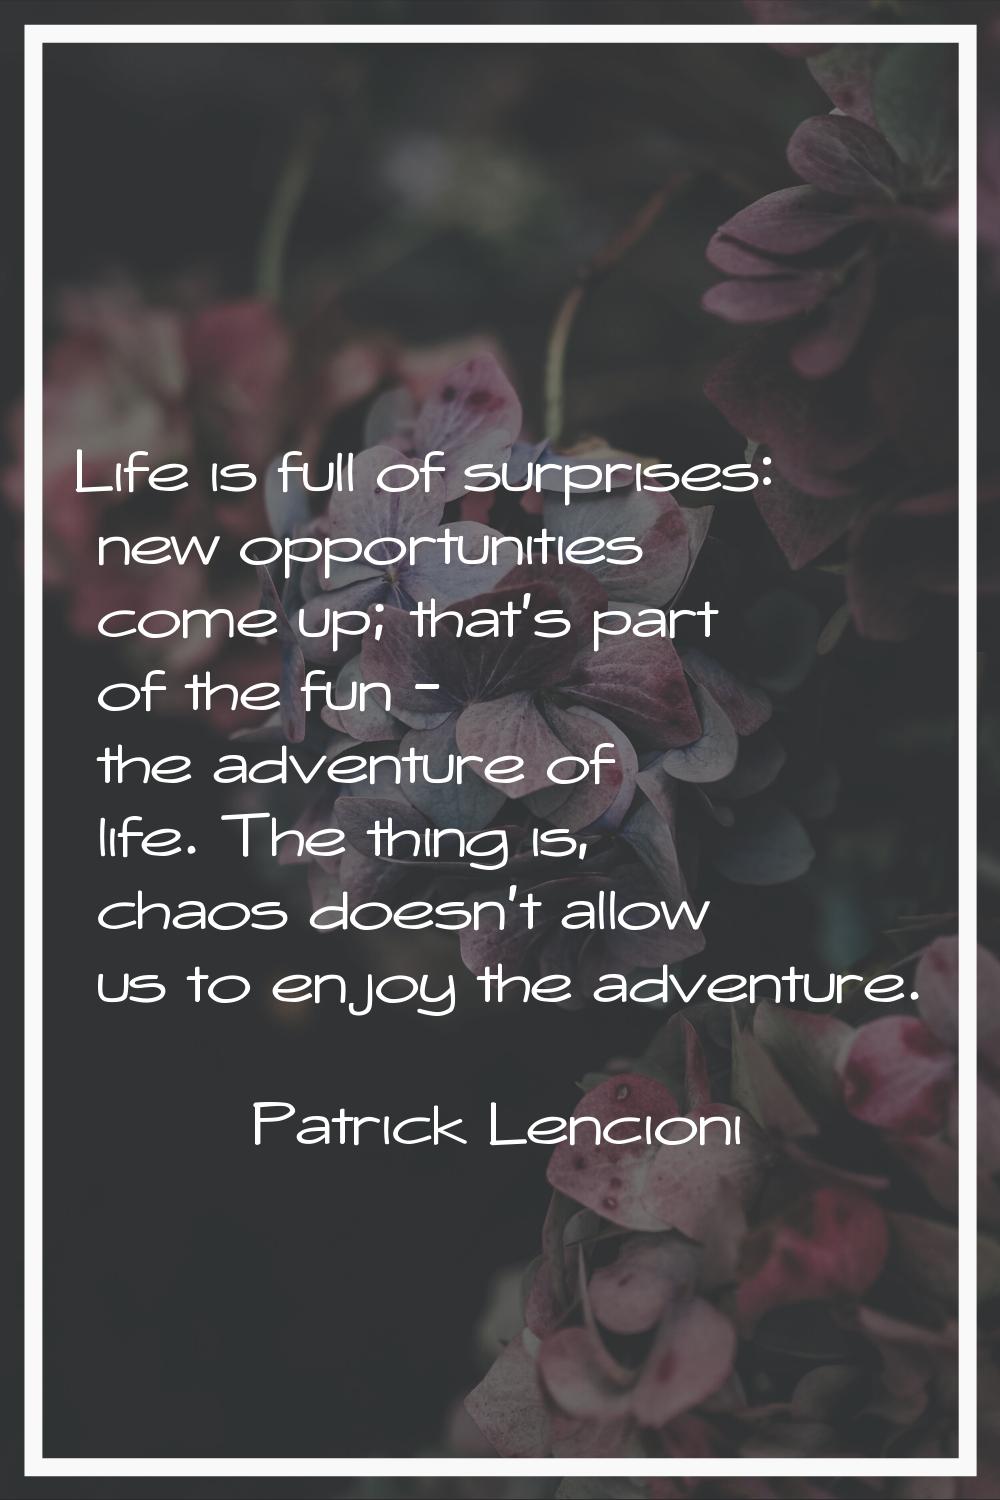 Life is full of surprises: new opportunities come up; that's part of the fun - the adventure of lif